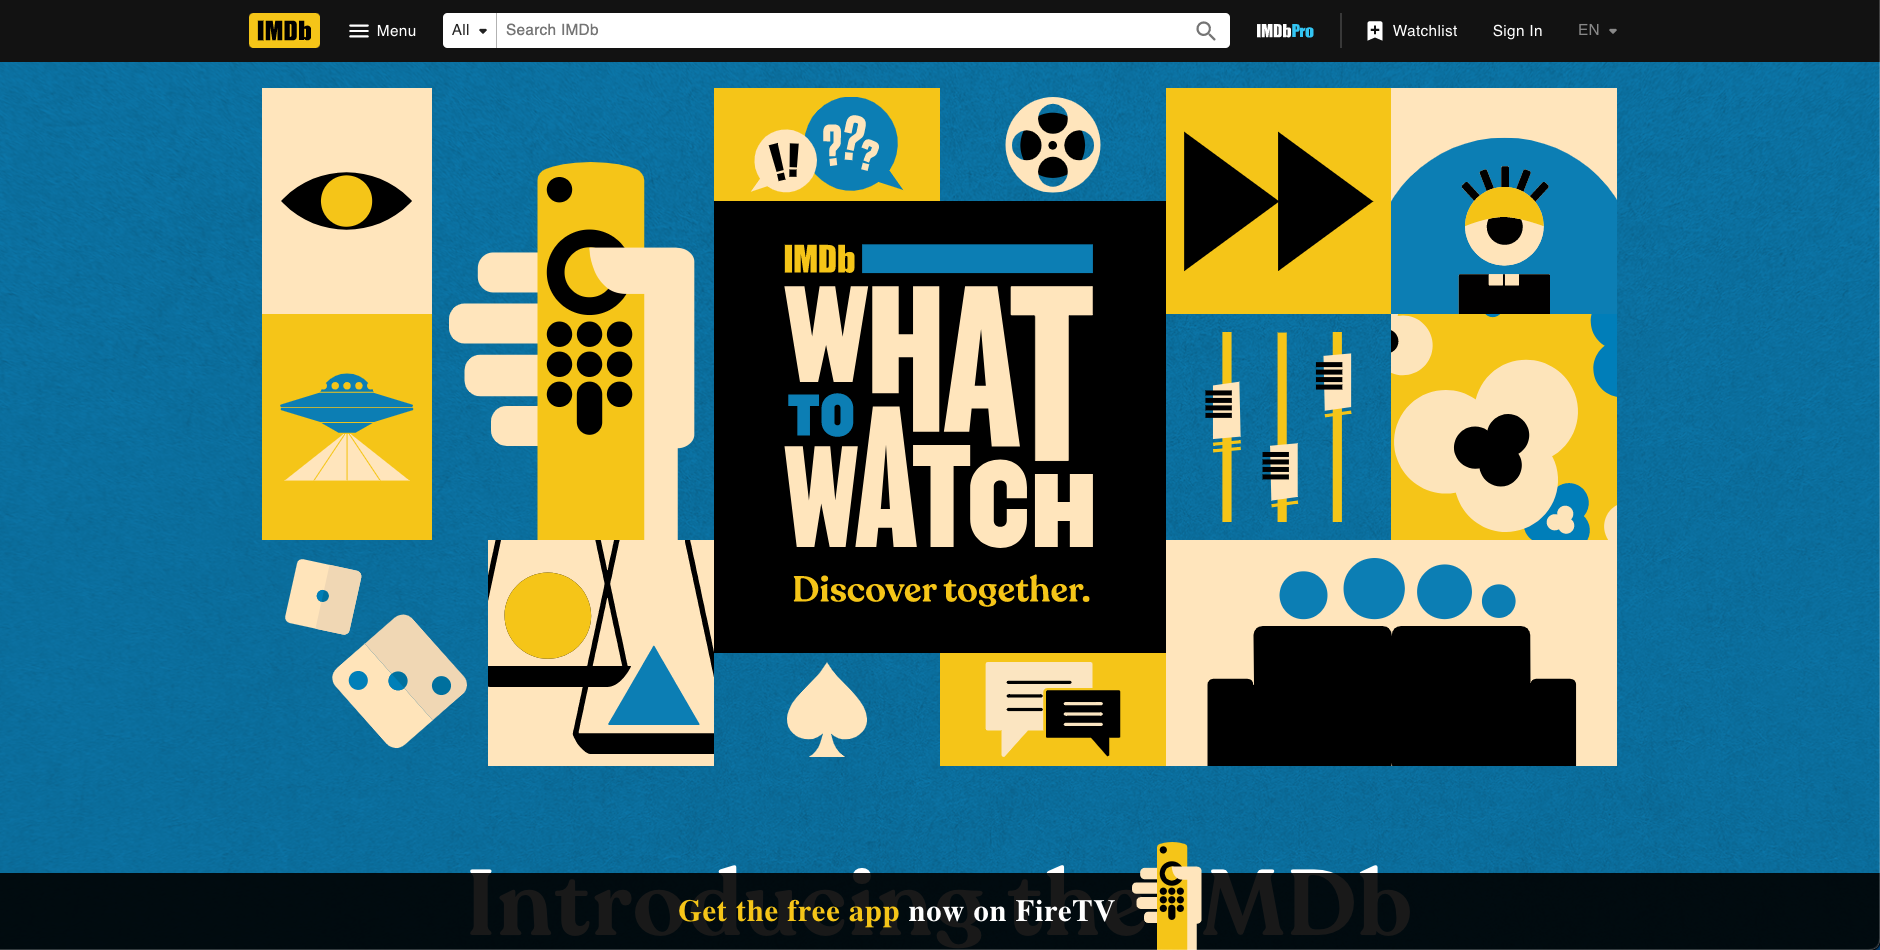 Remote.tools shares a list of websites to watch free movies. IMDb TV is a free, ad-supported streaming service from IMDb, the popular movie and TV show database owned by Amazon.